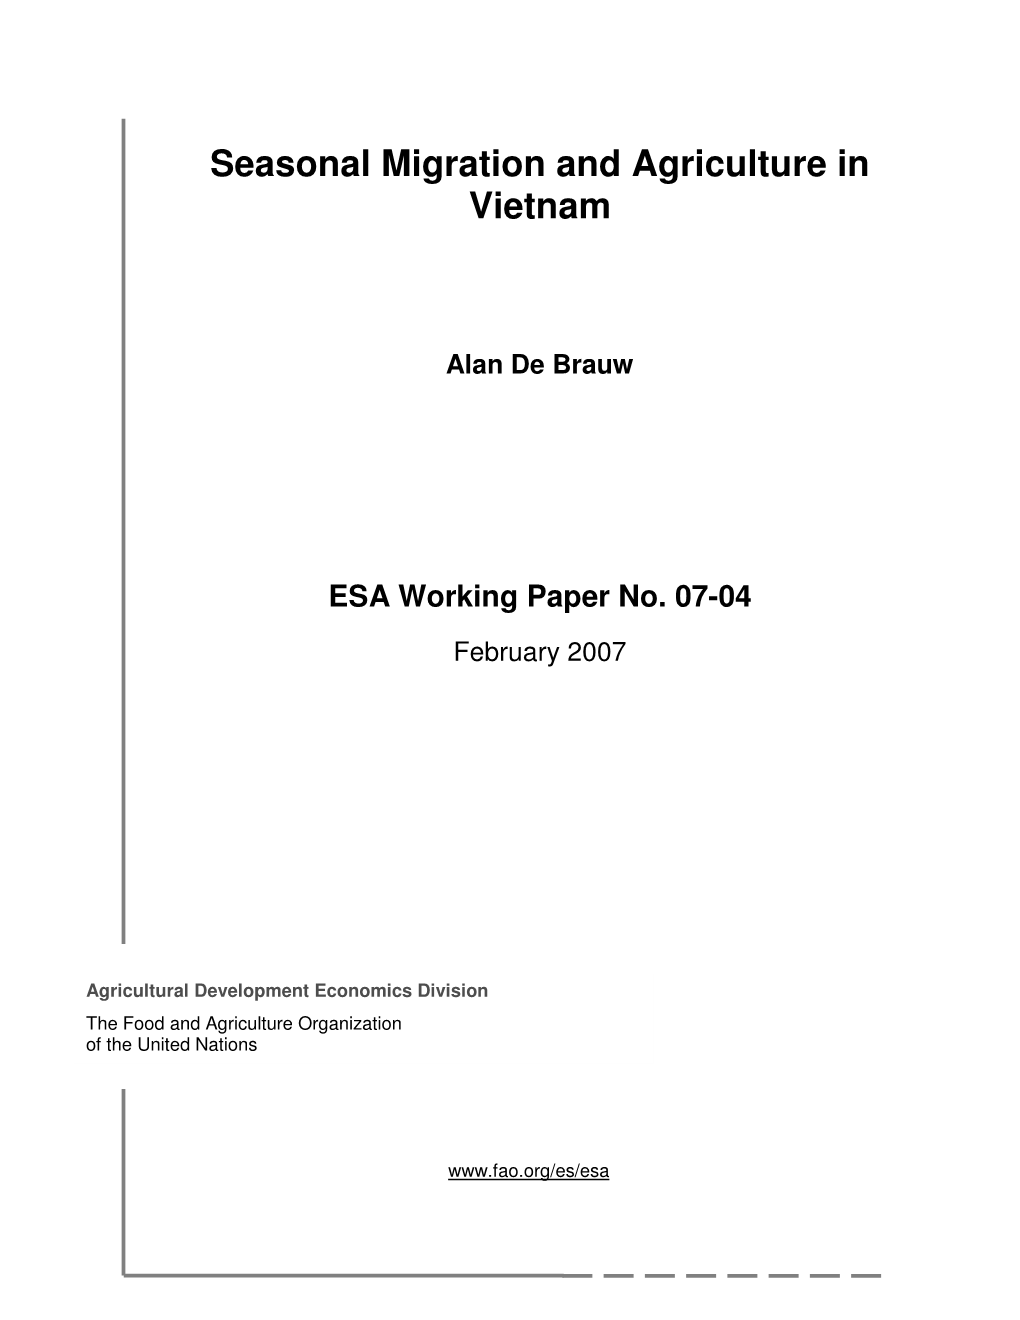 Seasonal Migration and Agriculture in Vietnam